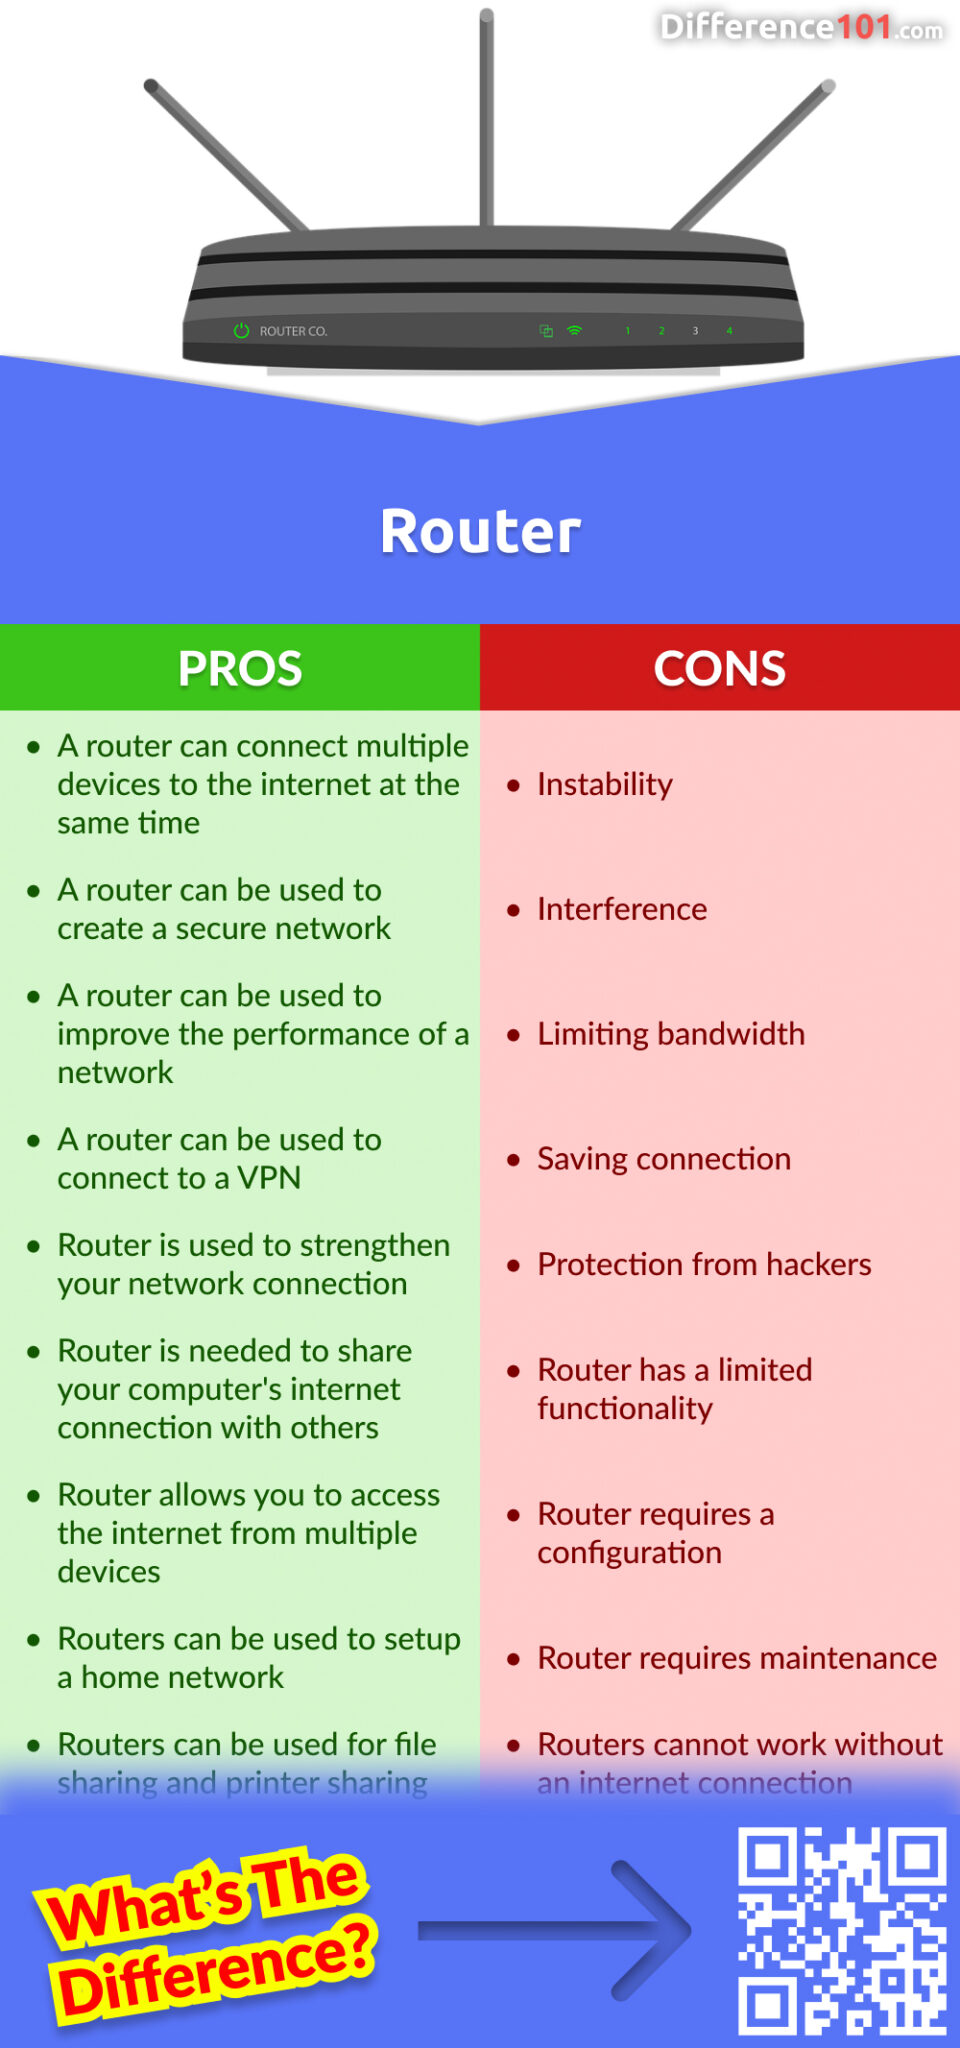 Router Pros & Cons